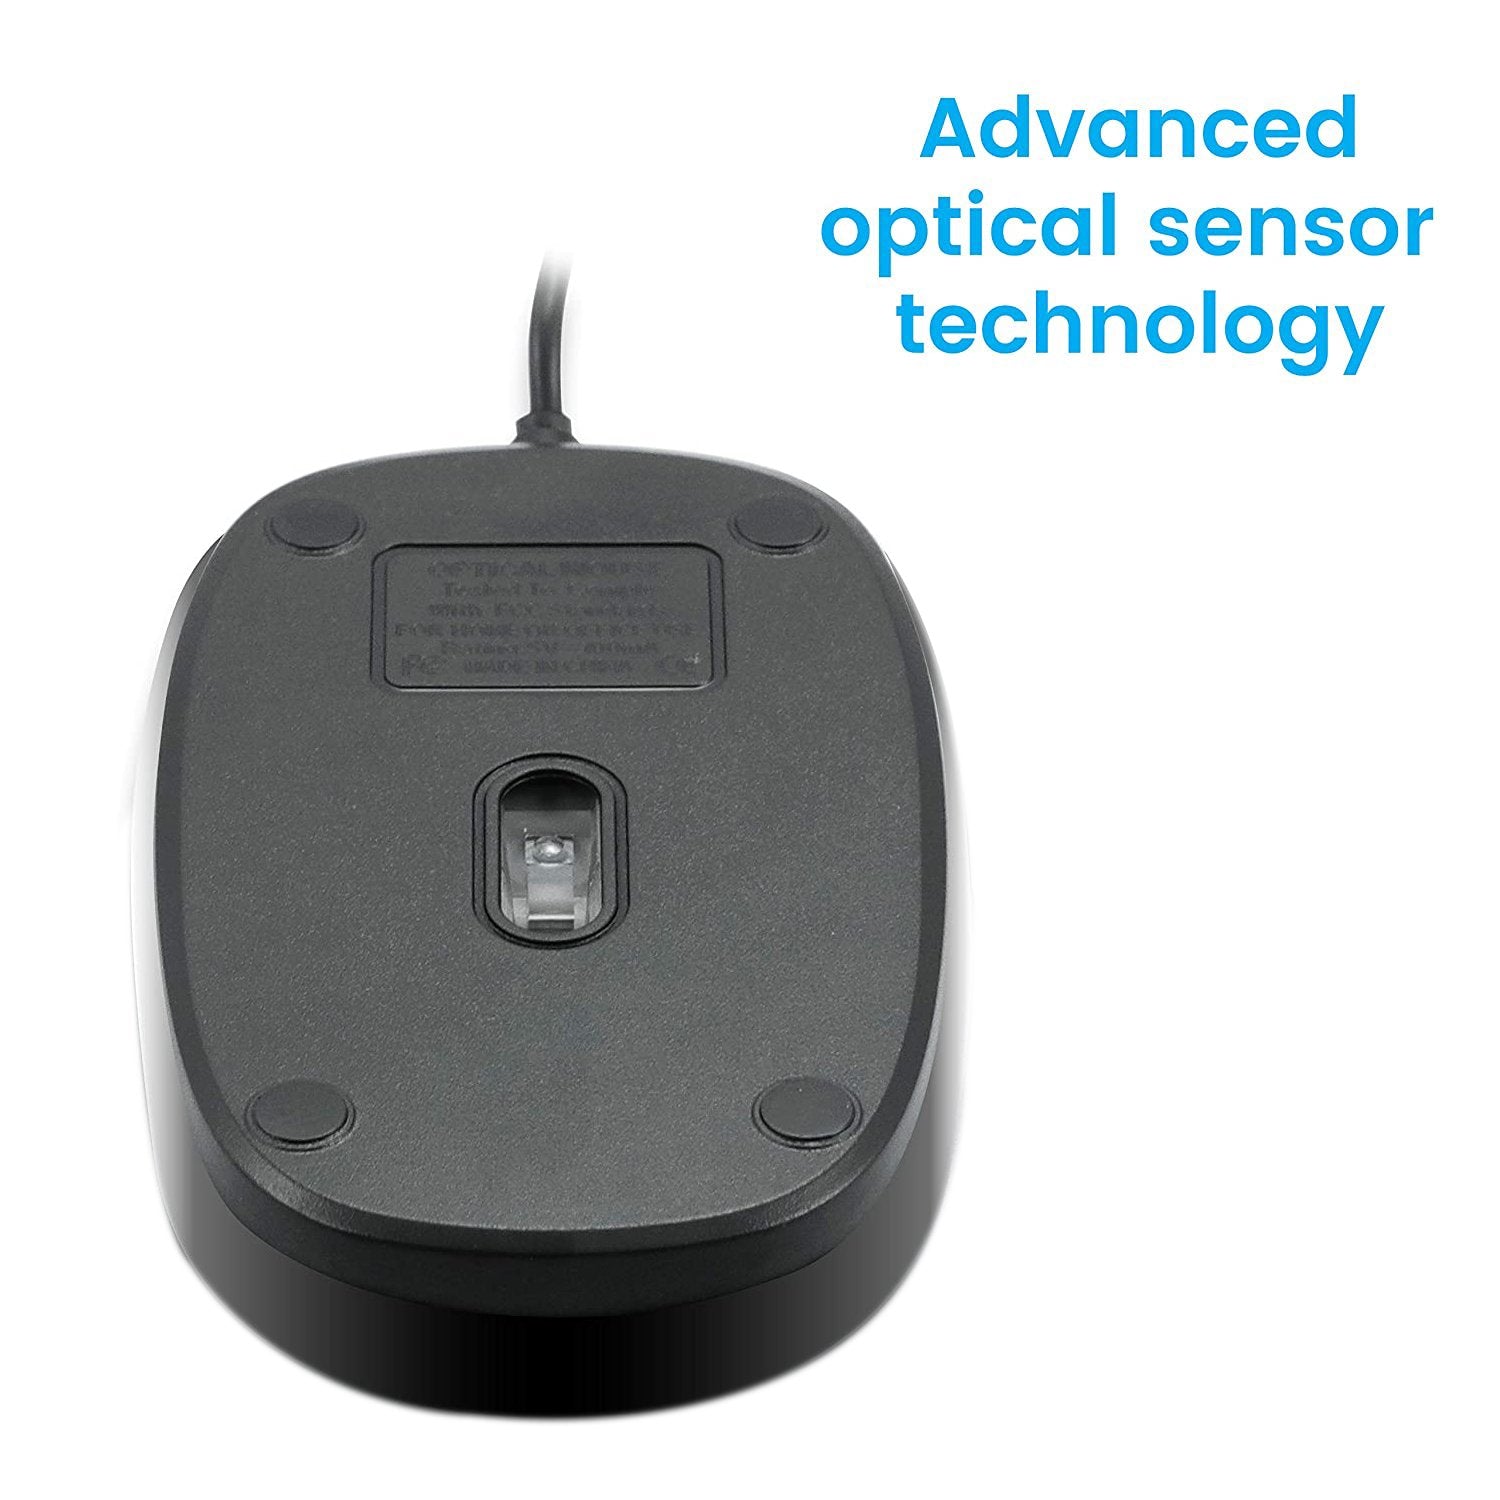 1423 Wired Mouse for Laptop and Desktop Computer PC With Faster Response Time (Silver) - SkyShopy